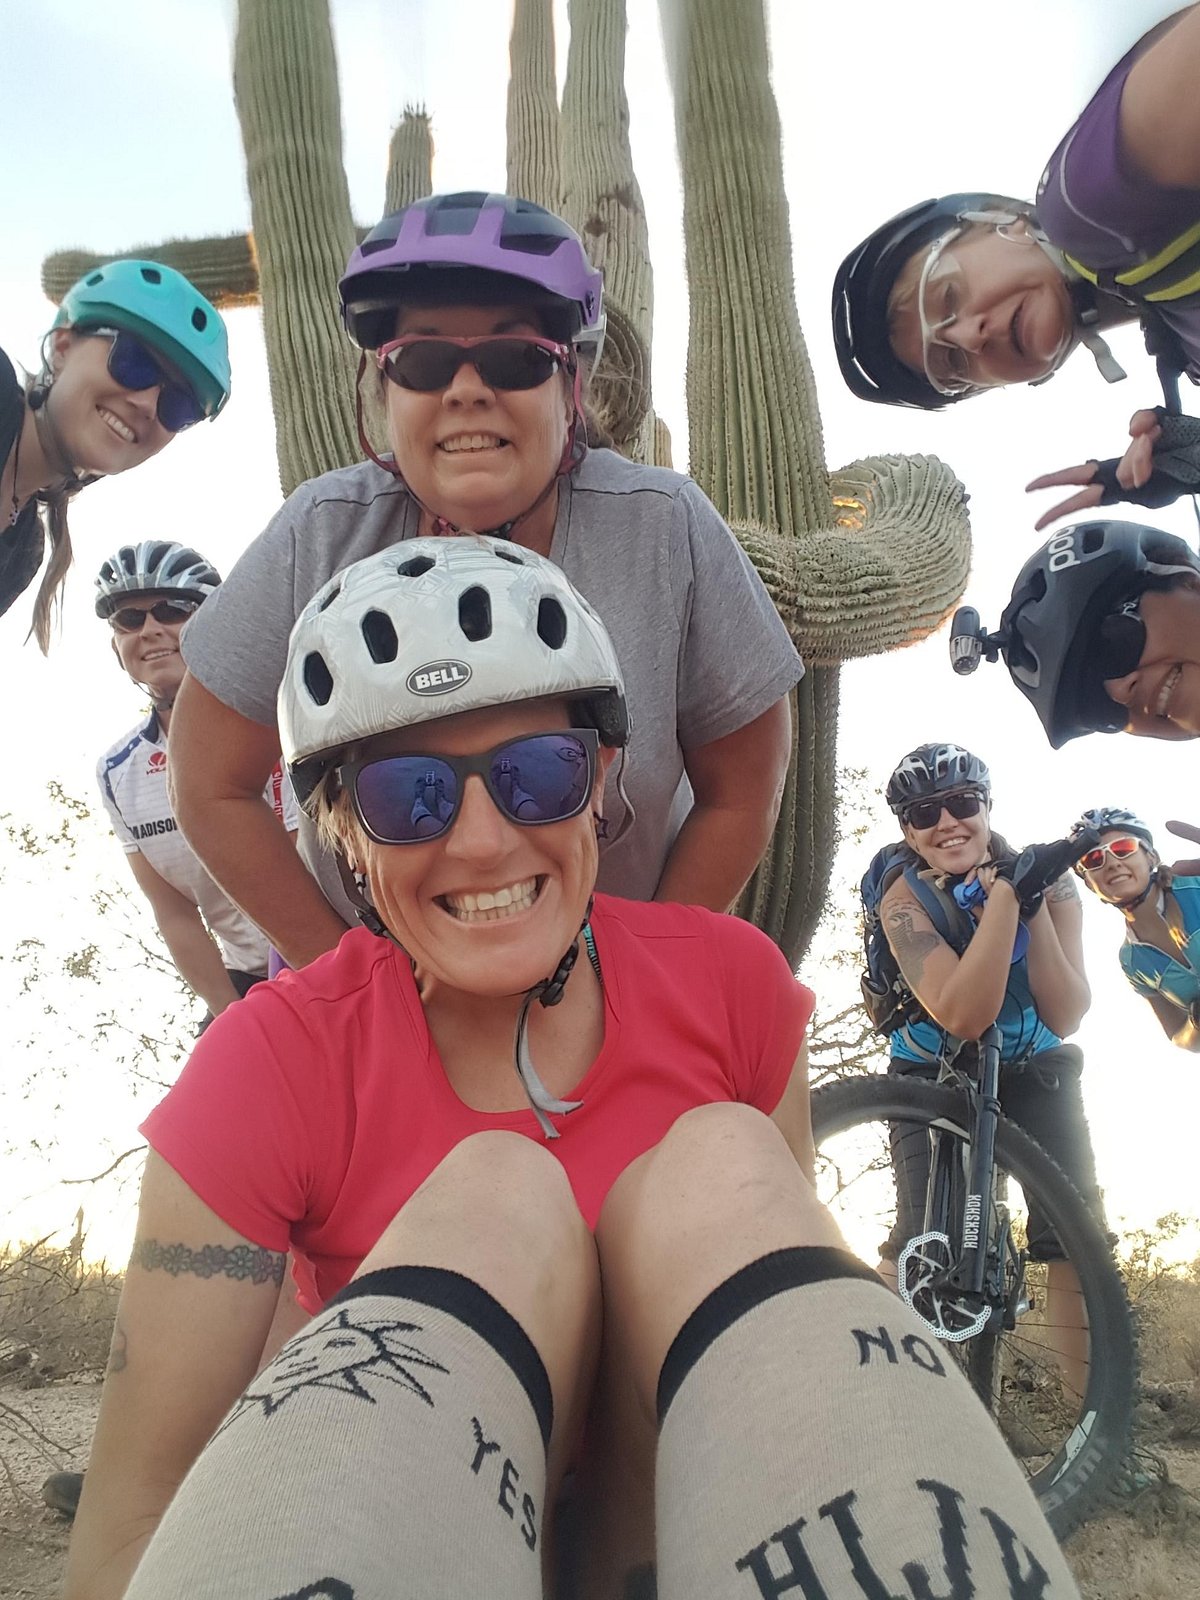 Laurel does tend to make a lot of friends during Phoenix hiking tours and Phoenix mountain bike tours. Here she is all smiles at the center of a friend's group during one recent adventure.